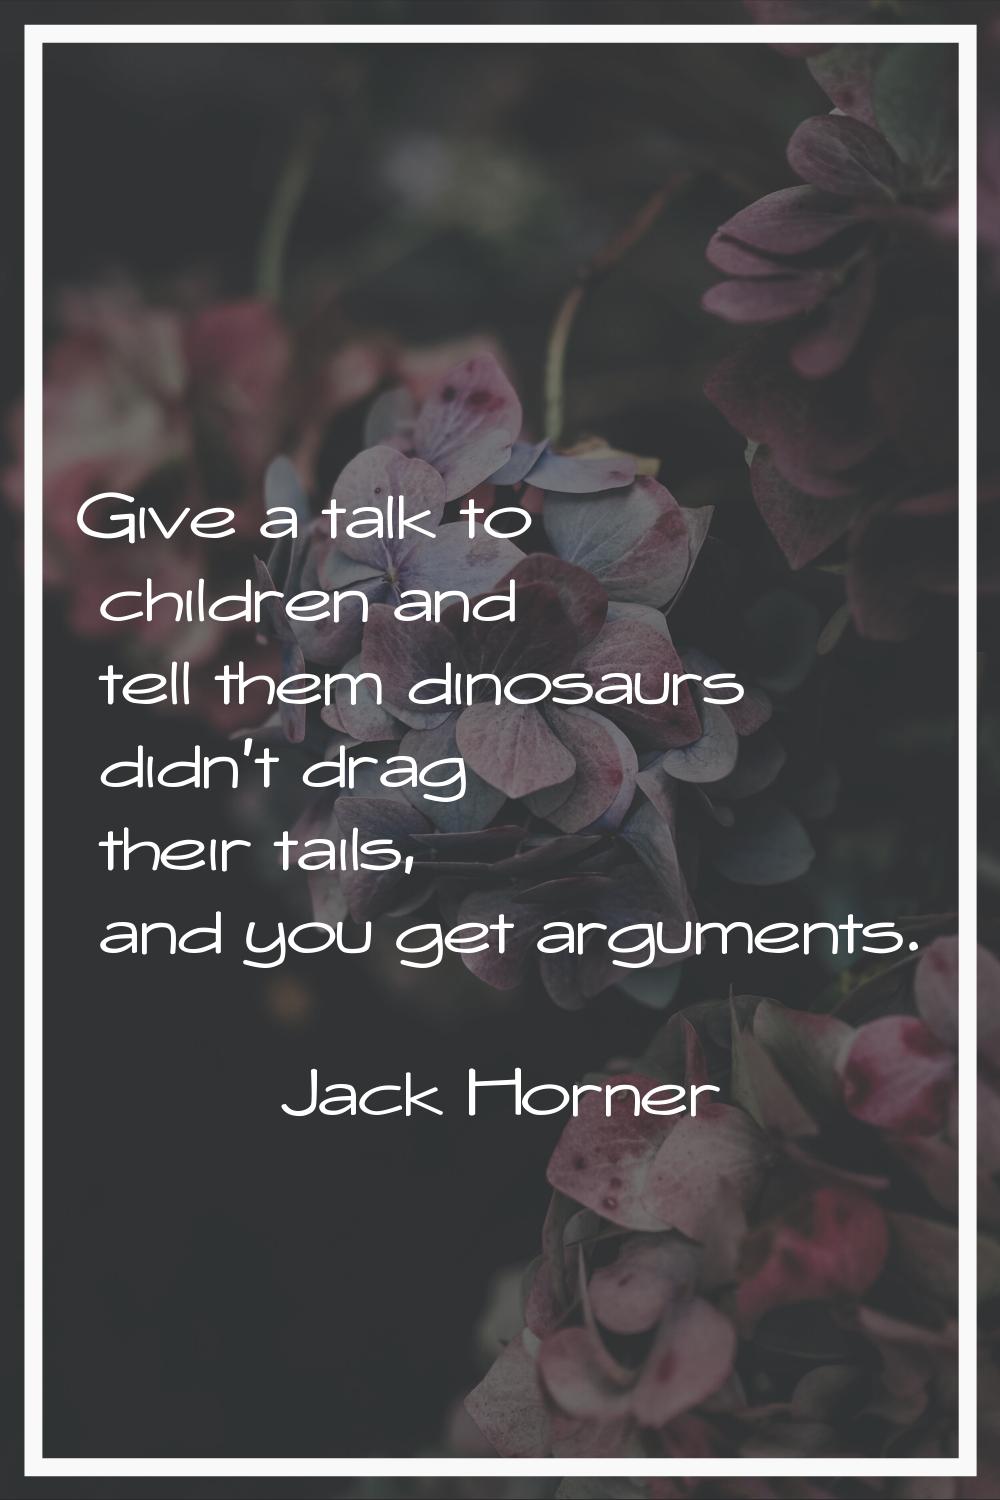 Give a talk to children and tell them dinosaurs didn't drag their tails, and you get arguments.